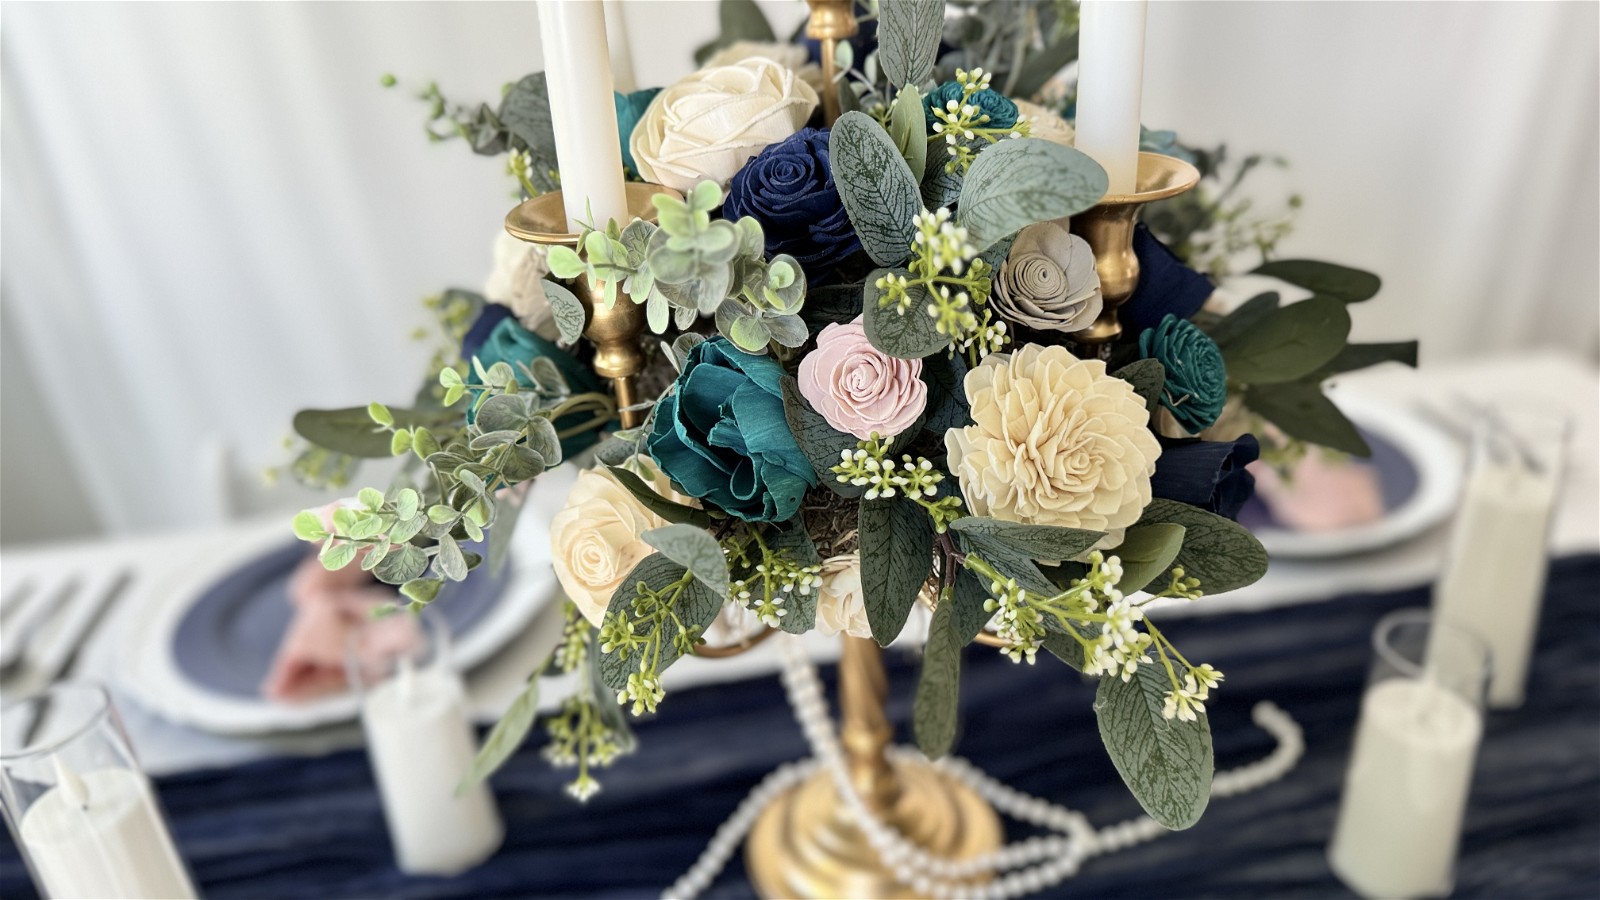 Image of Vintage Floral Candlelabra - DIY Wedding Centerpiece Step-by-Step Instructions